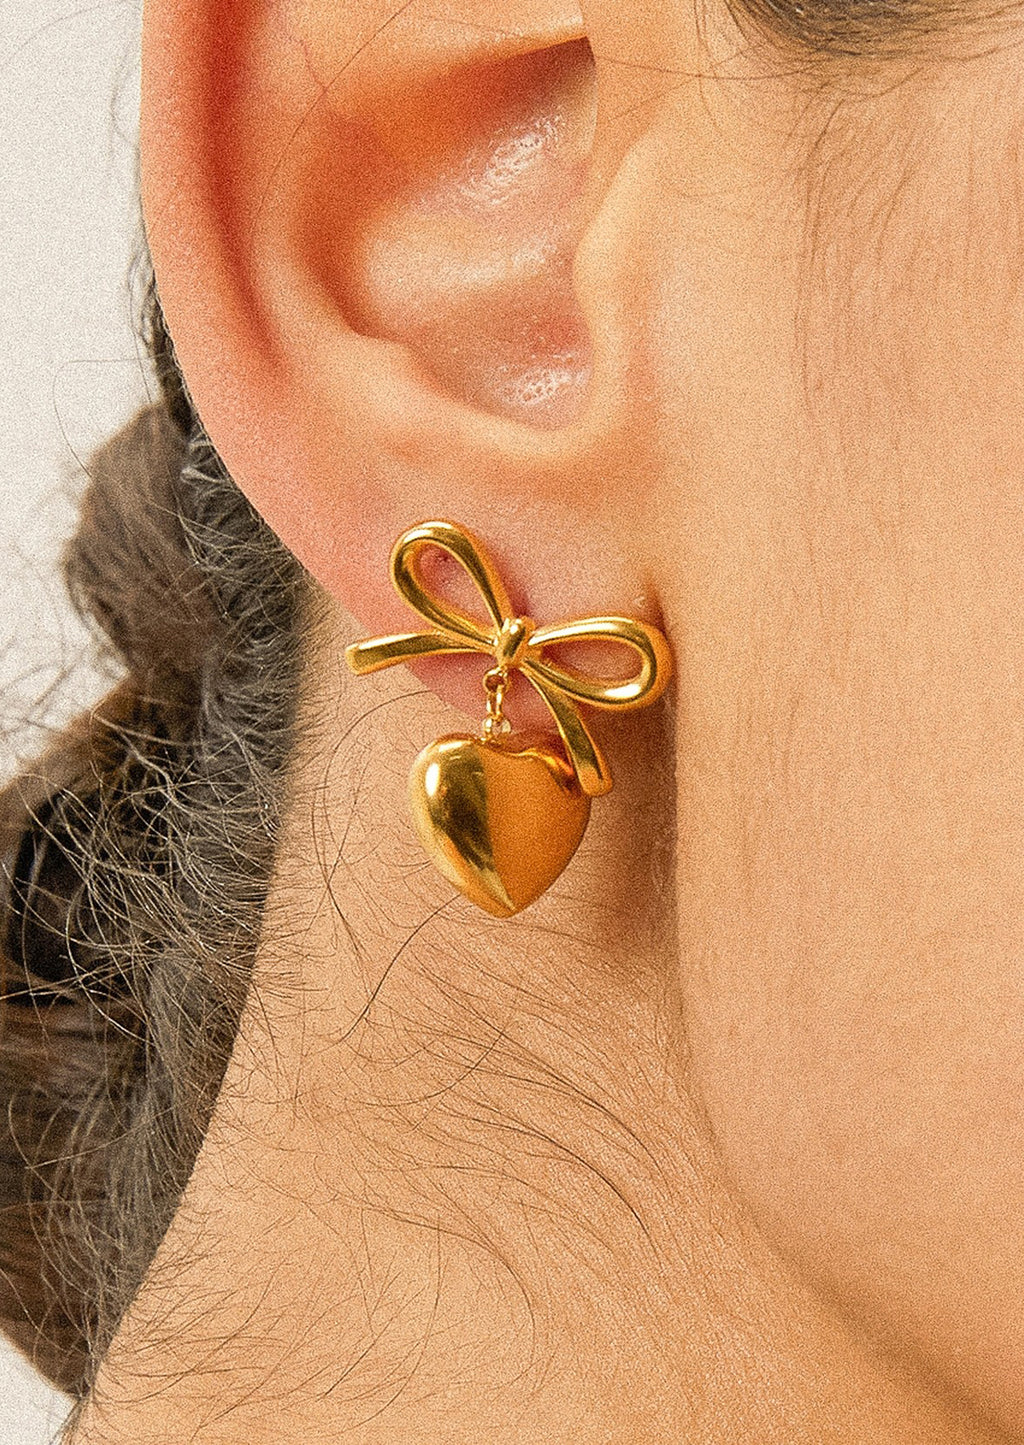 1: A pair of gold earrings with dangling heart charm and bow shaped post.